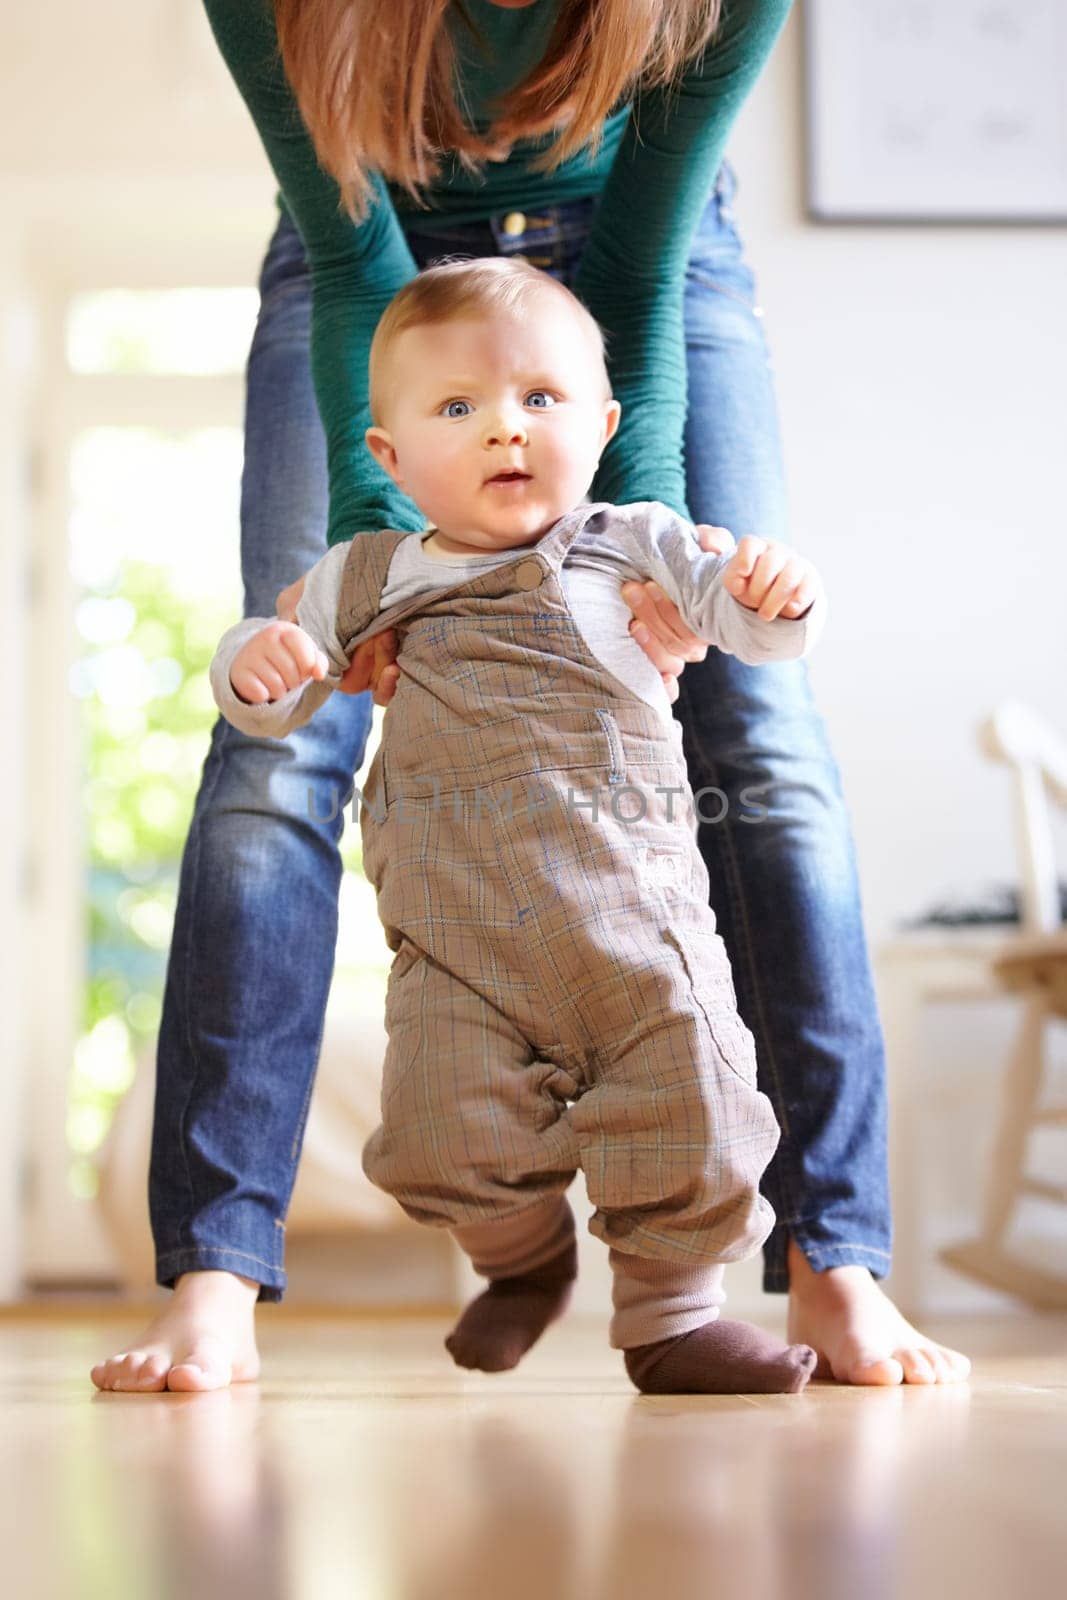 Mother, baby and face with help for walking in home for motor skills, development or milestone with assistance. Son, toddler and excited for mobility, movement or freedom in living room with support.